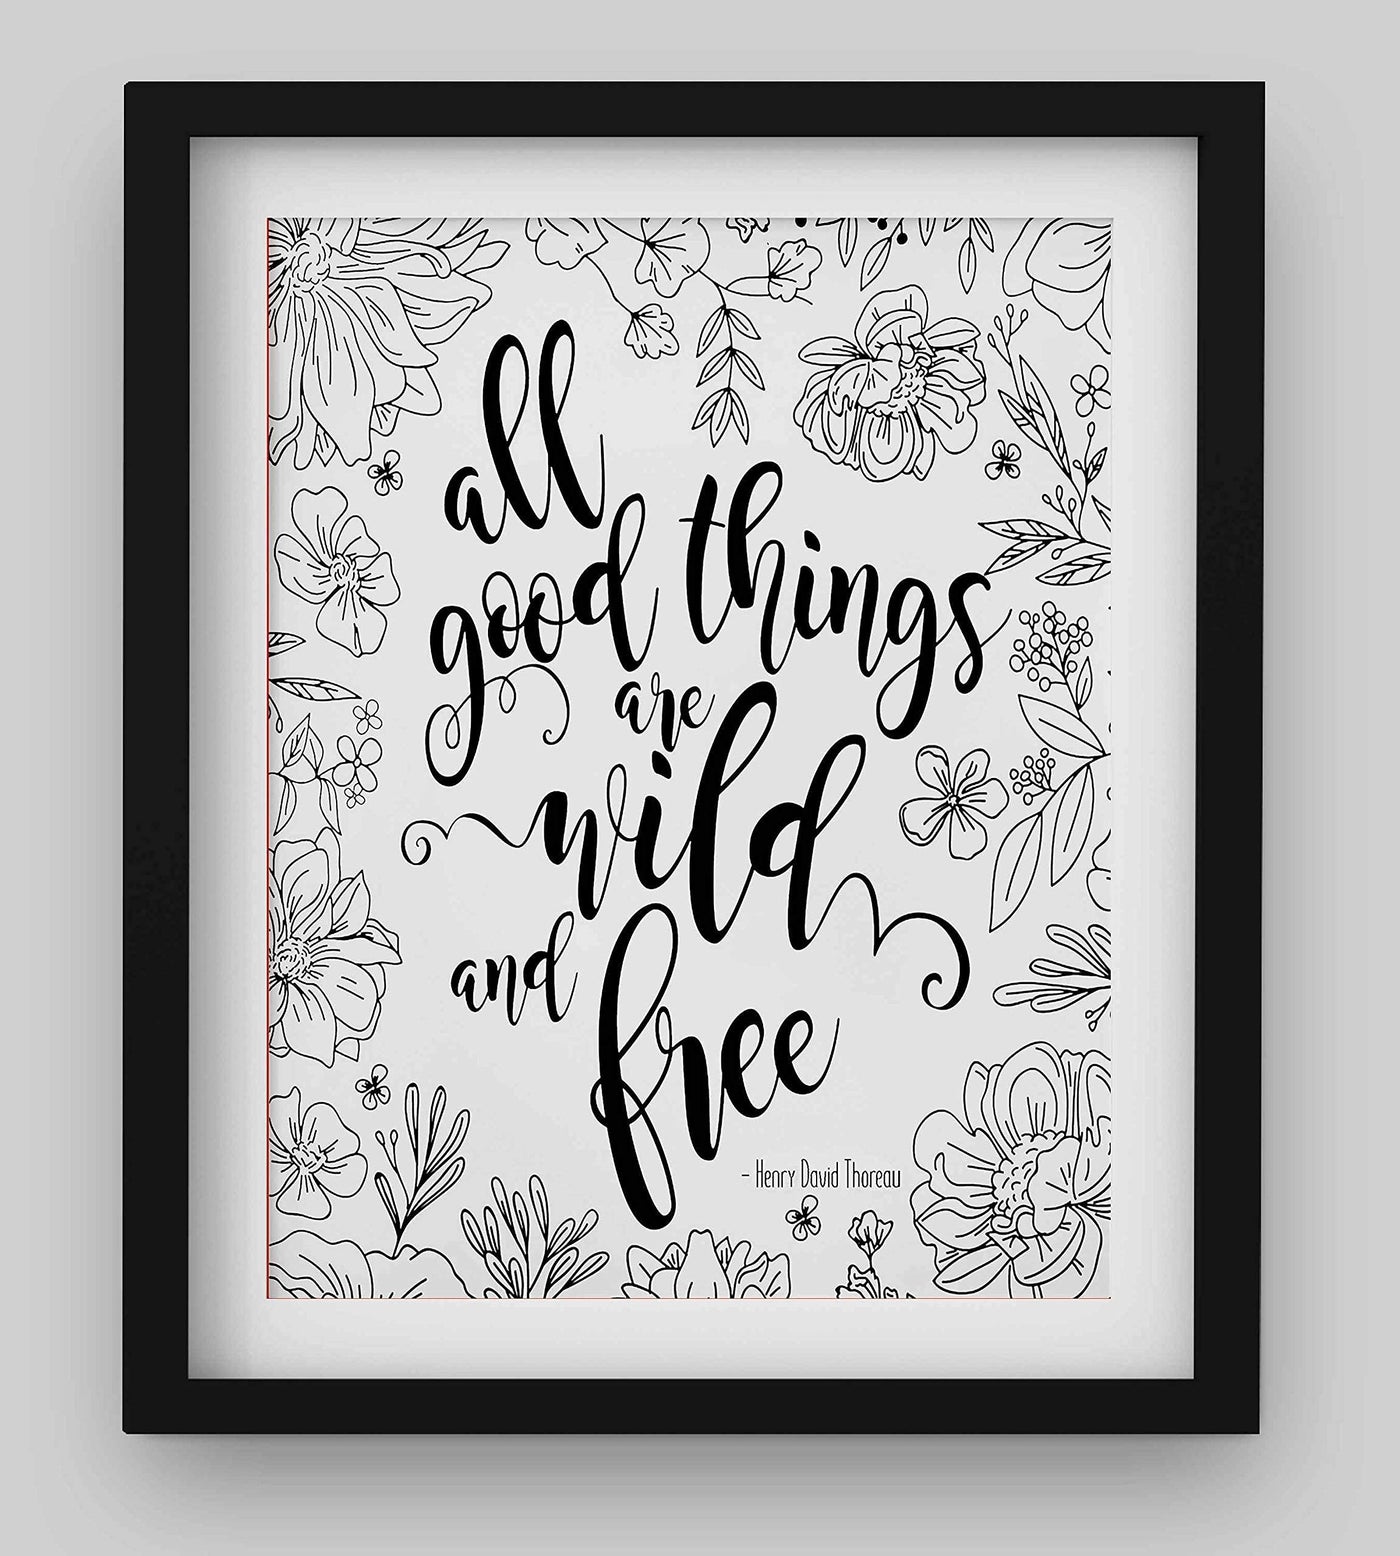 Henry David Thoreau-"All Good Things-Wild and Free" Inspirational Quotes Wall Art-8 x 10" Modern Typographic Art Print-Ready to Frame. Motivational Home-Office-School Decor. Great Literary Gift!